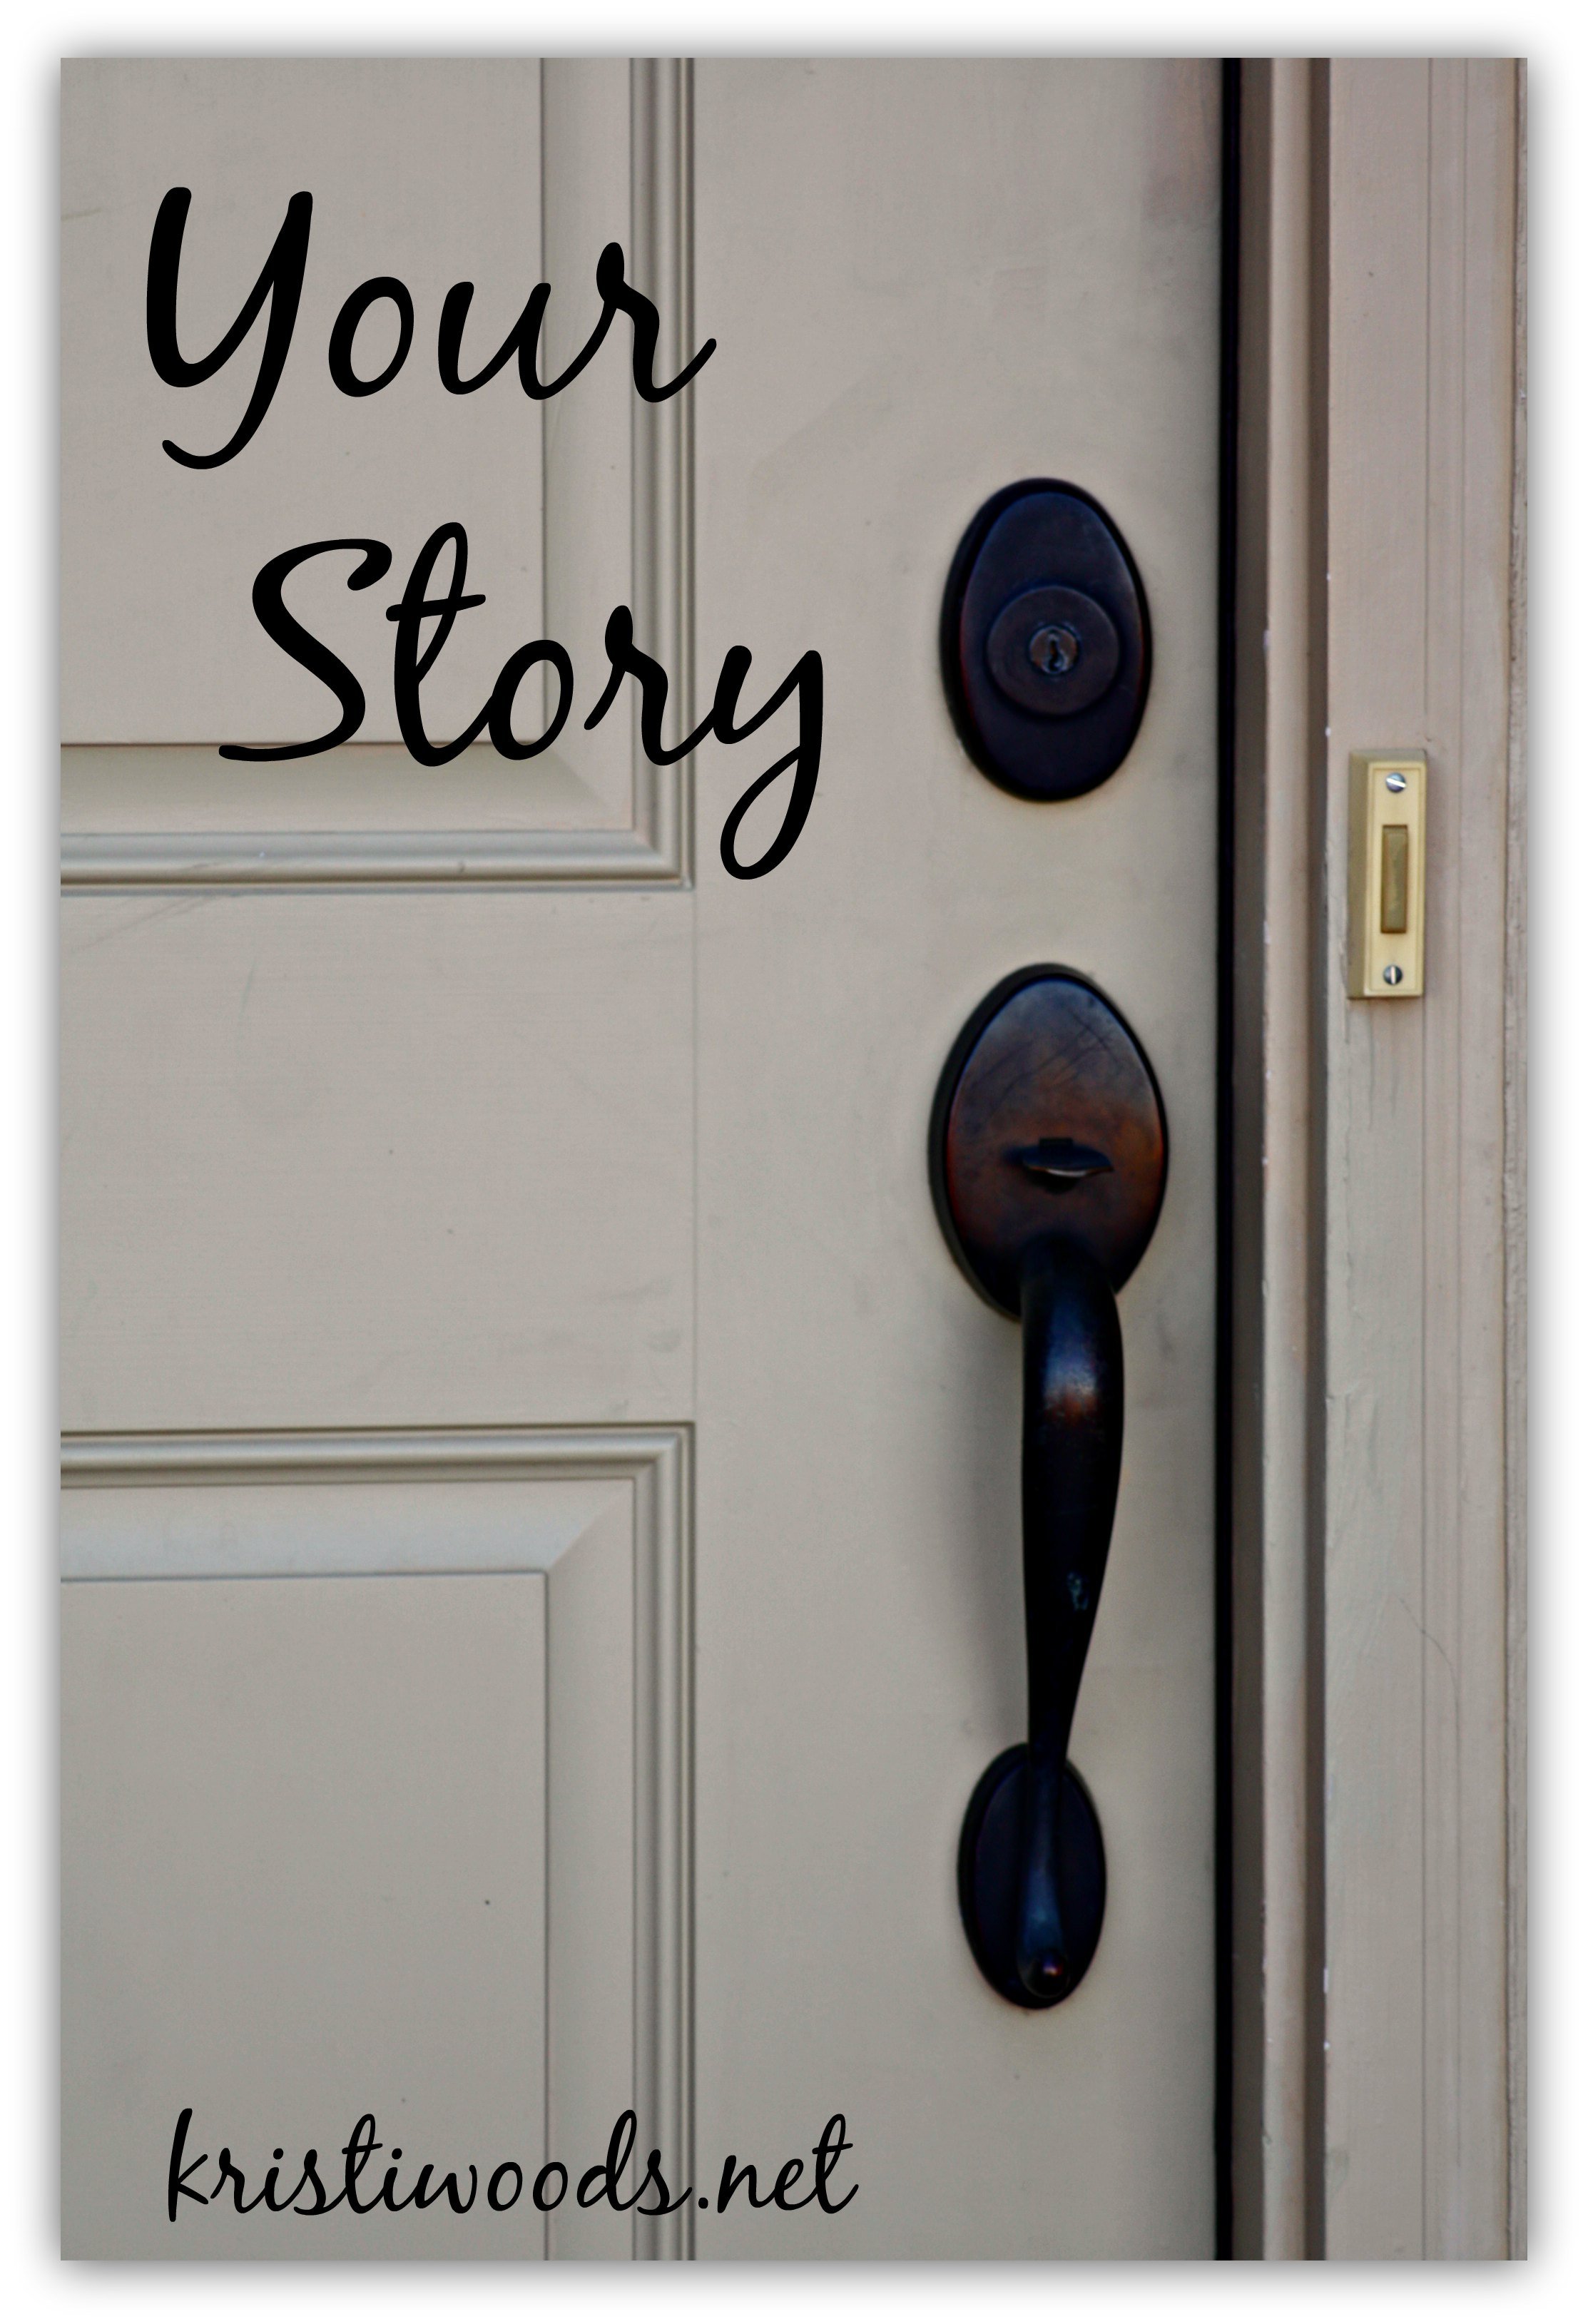 Your Story: Every House